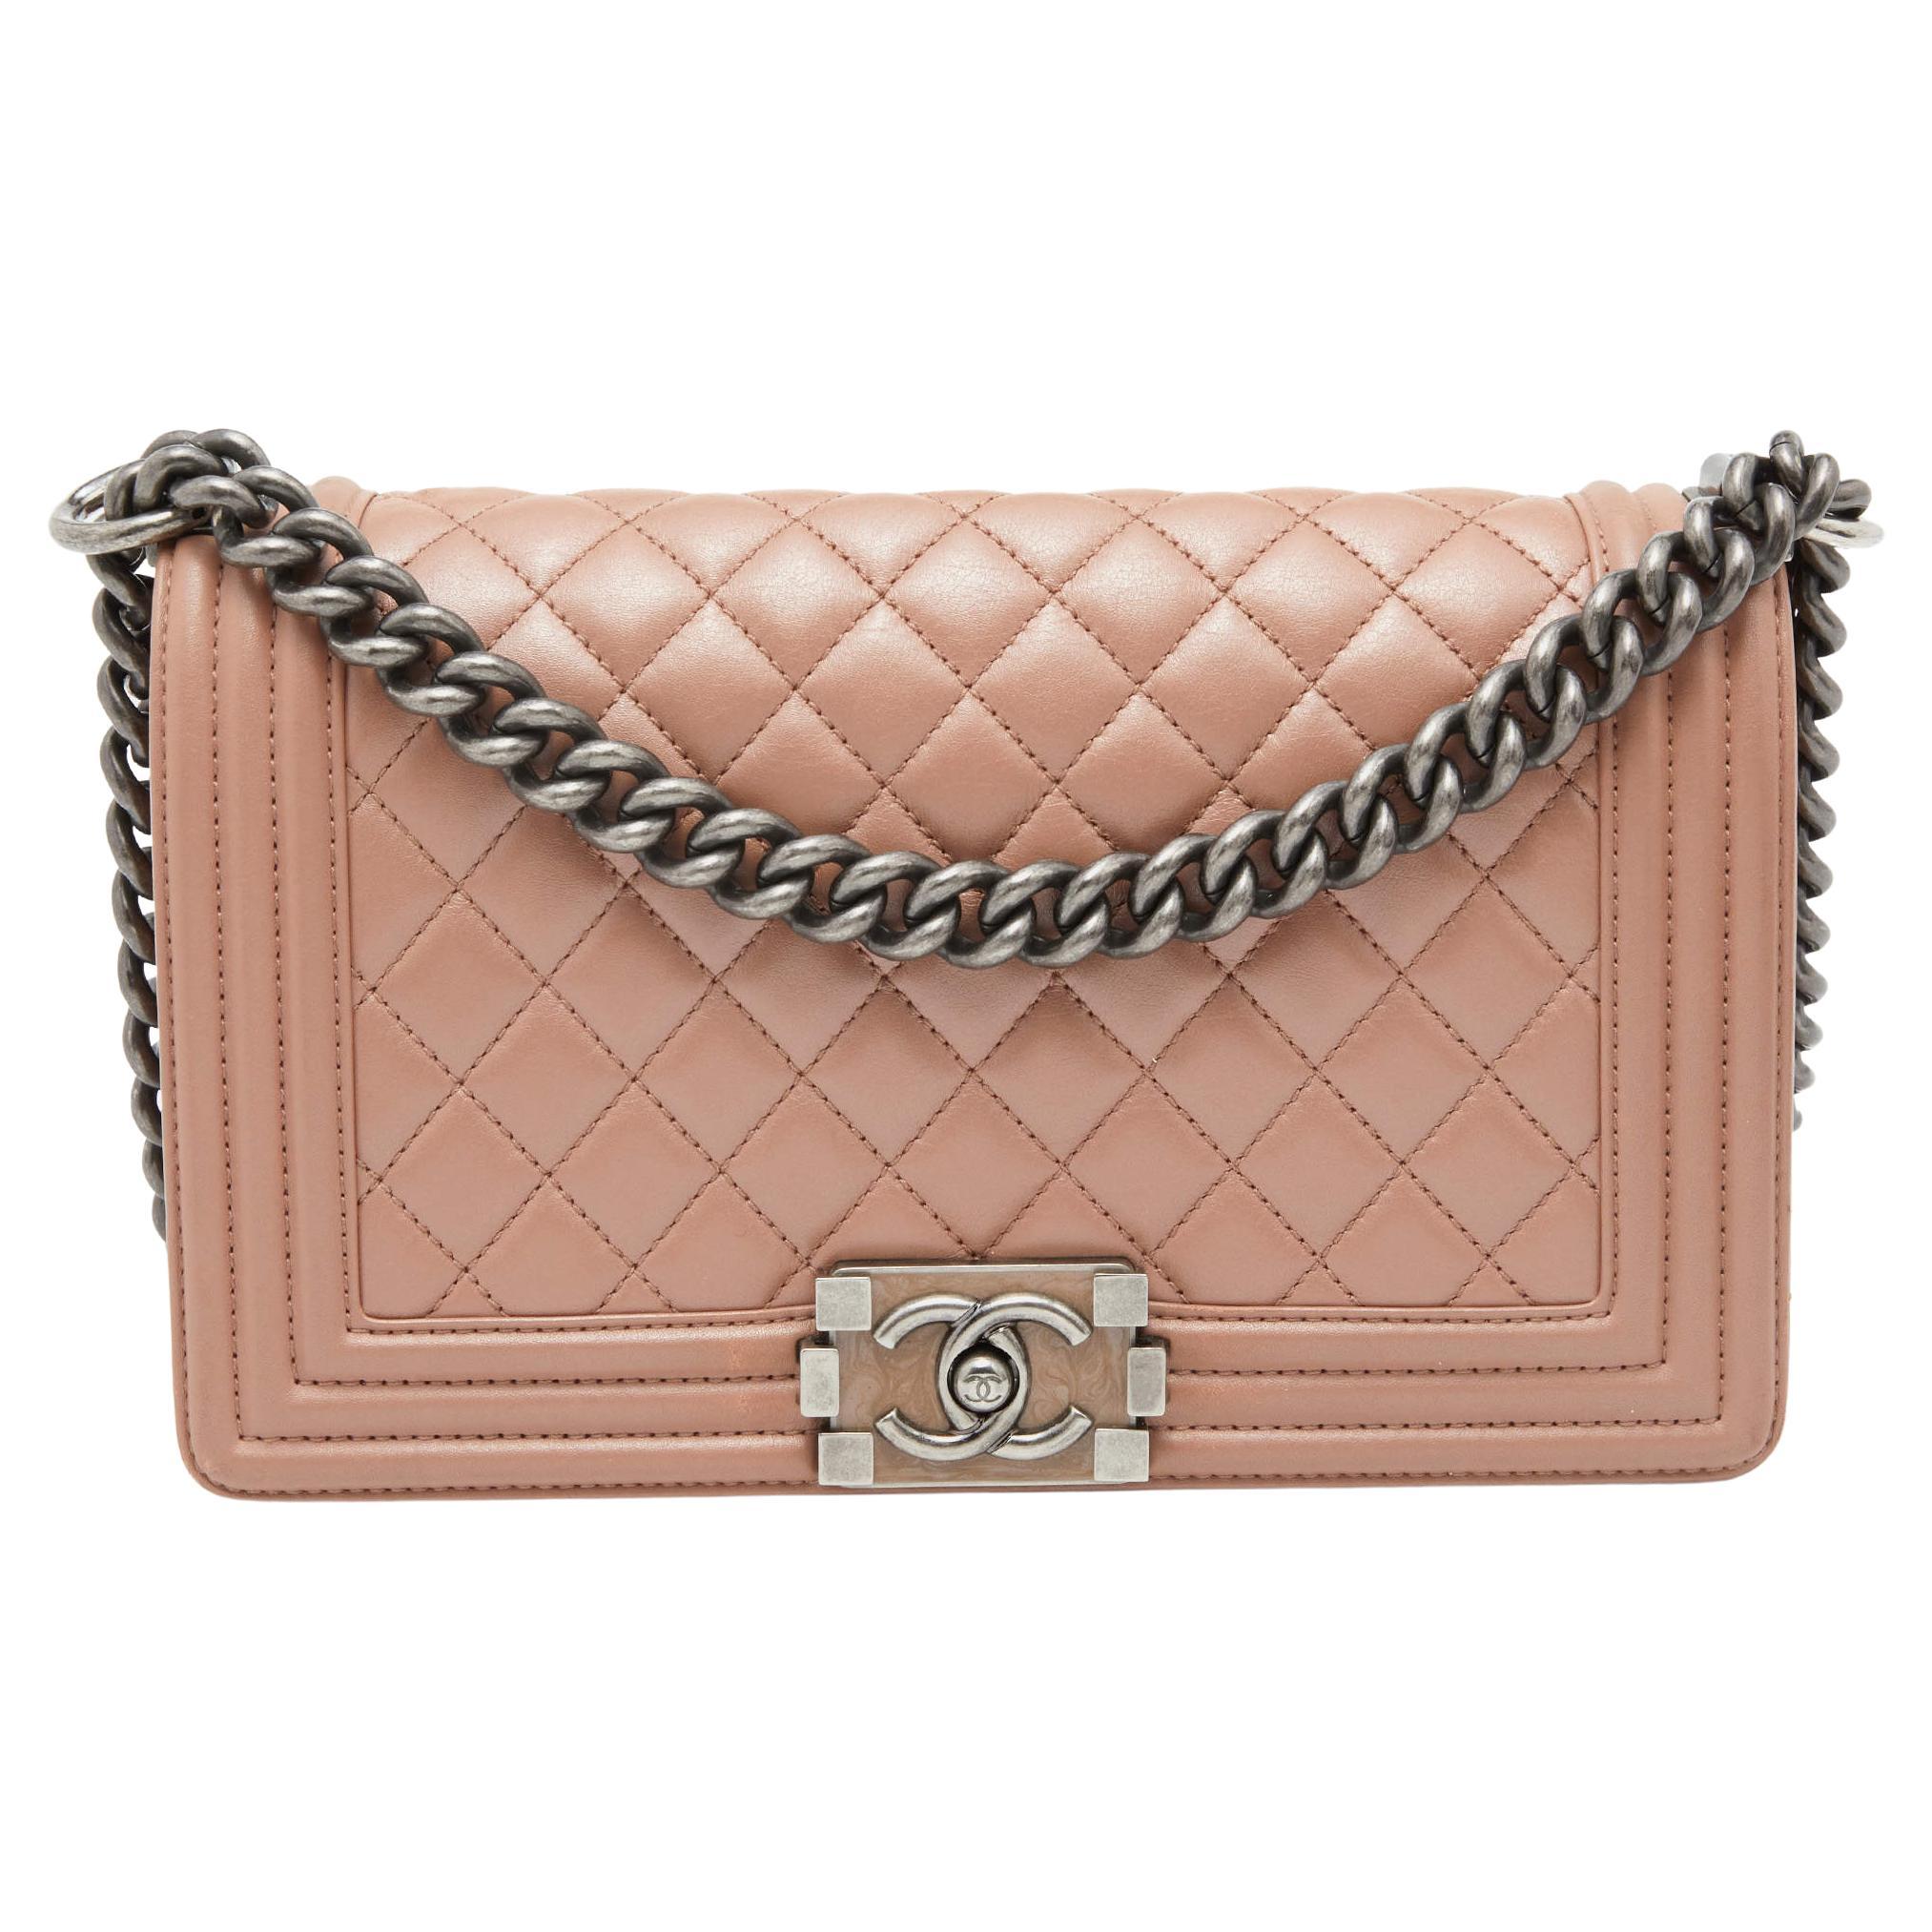 Chanel Beige Quilted Leather Medium Boy Flap Bag